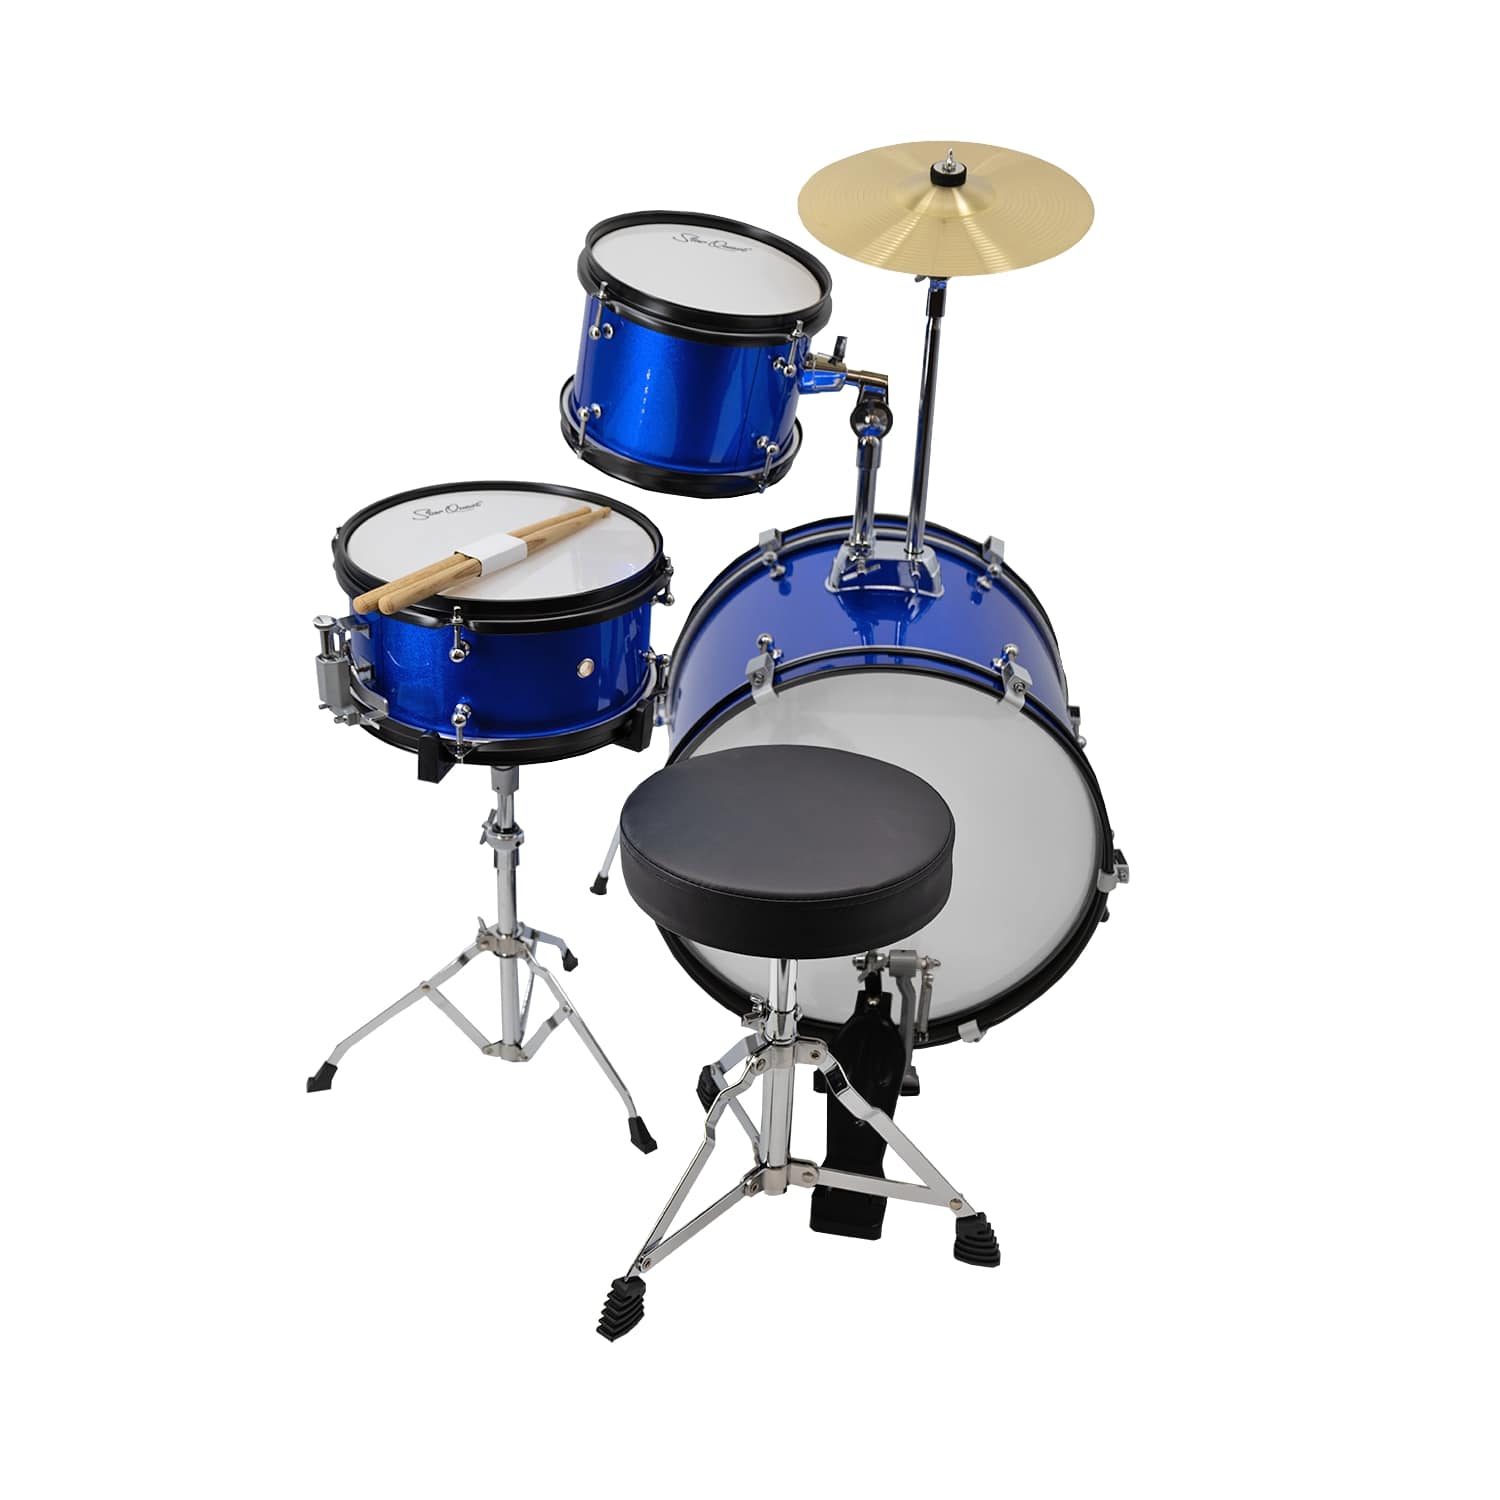 StarQuest Junior 3-Piece Drum Set, Metallic Blue Finish with Bass, Snare, Tom and Crash Cymbal, Perfect for Young Drummers and Beginners